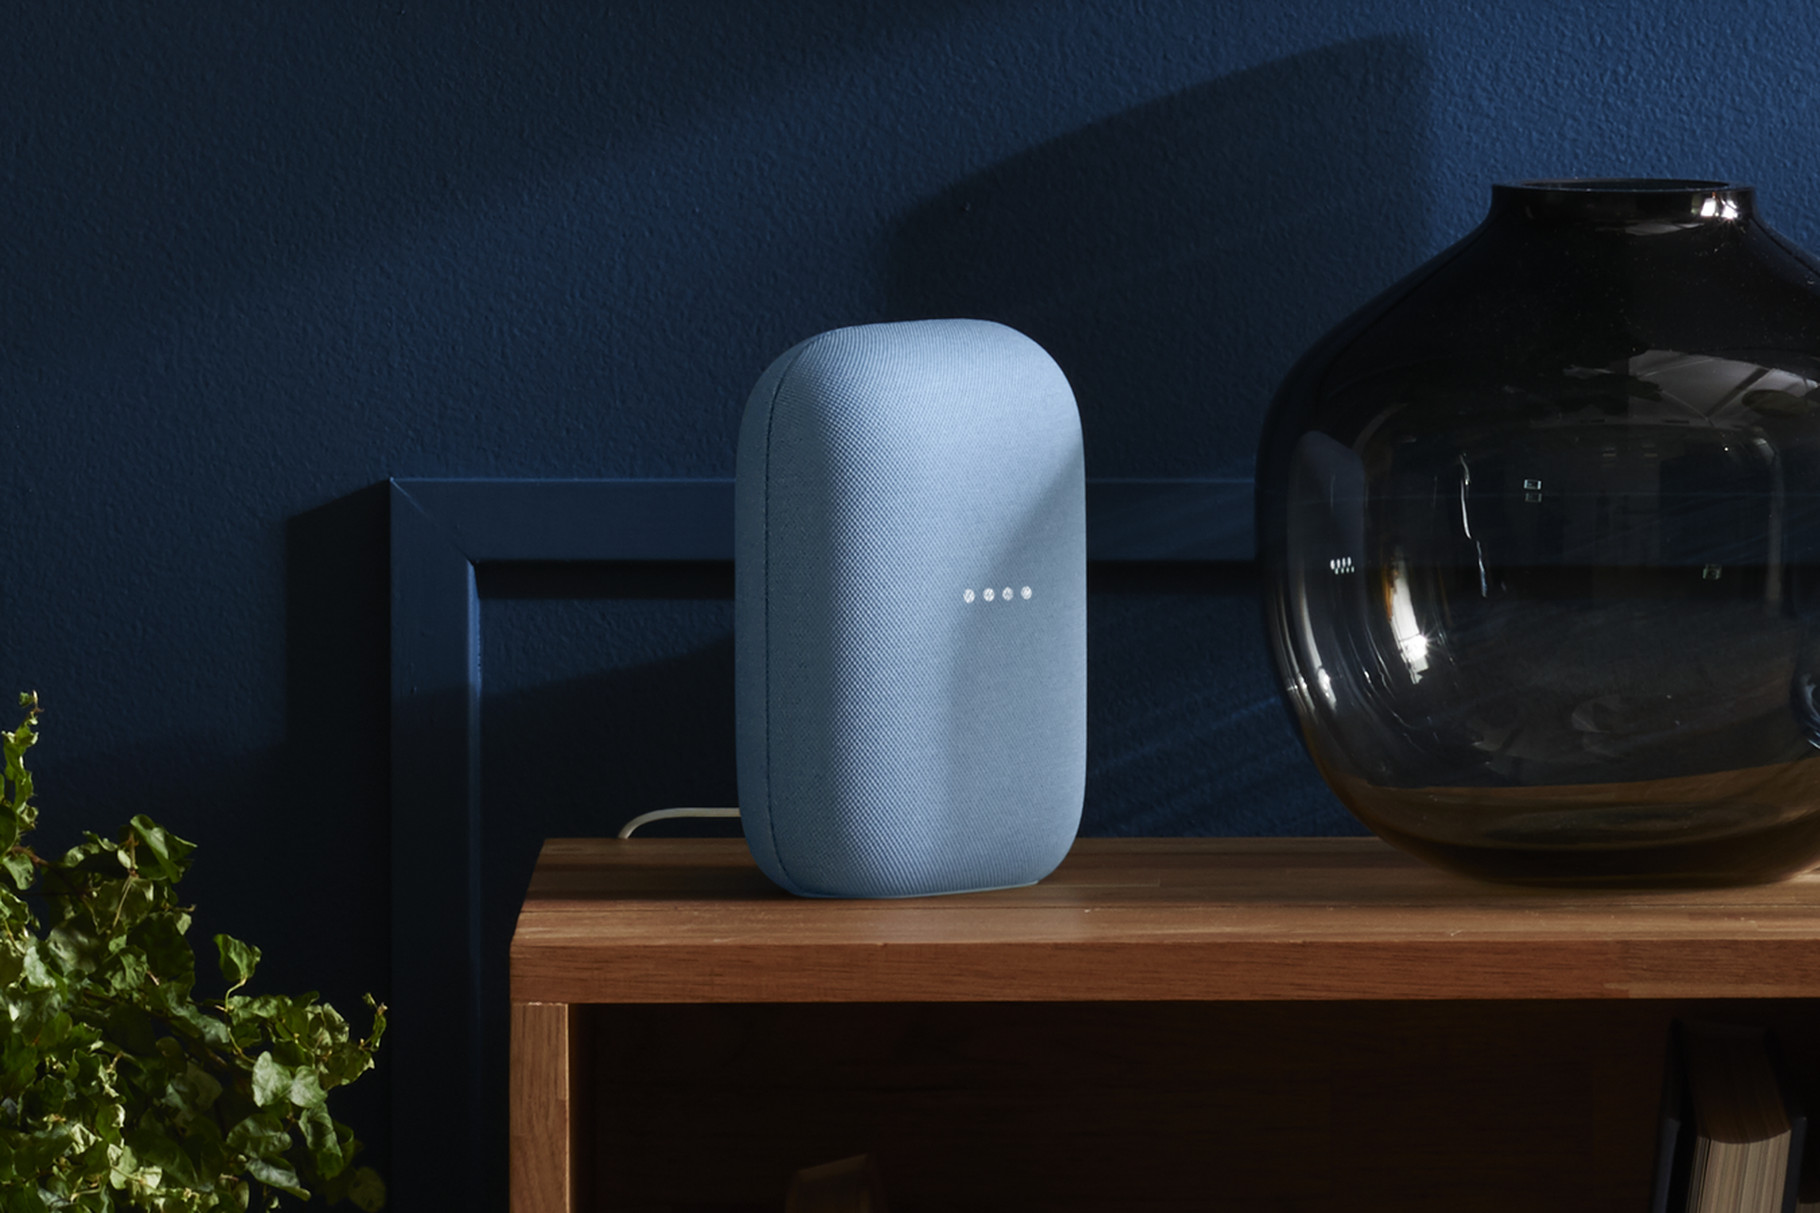 Google tease an update to their Home smart speaker